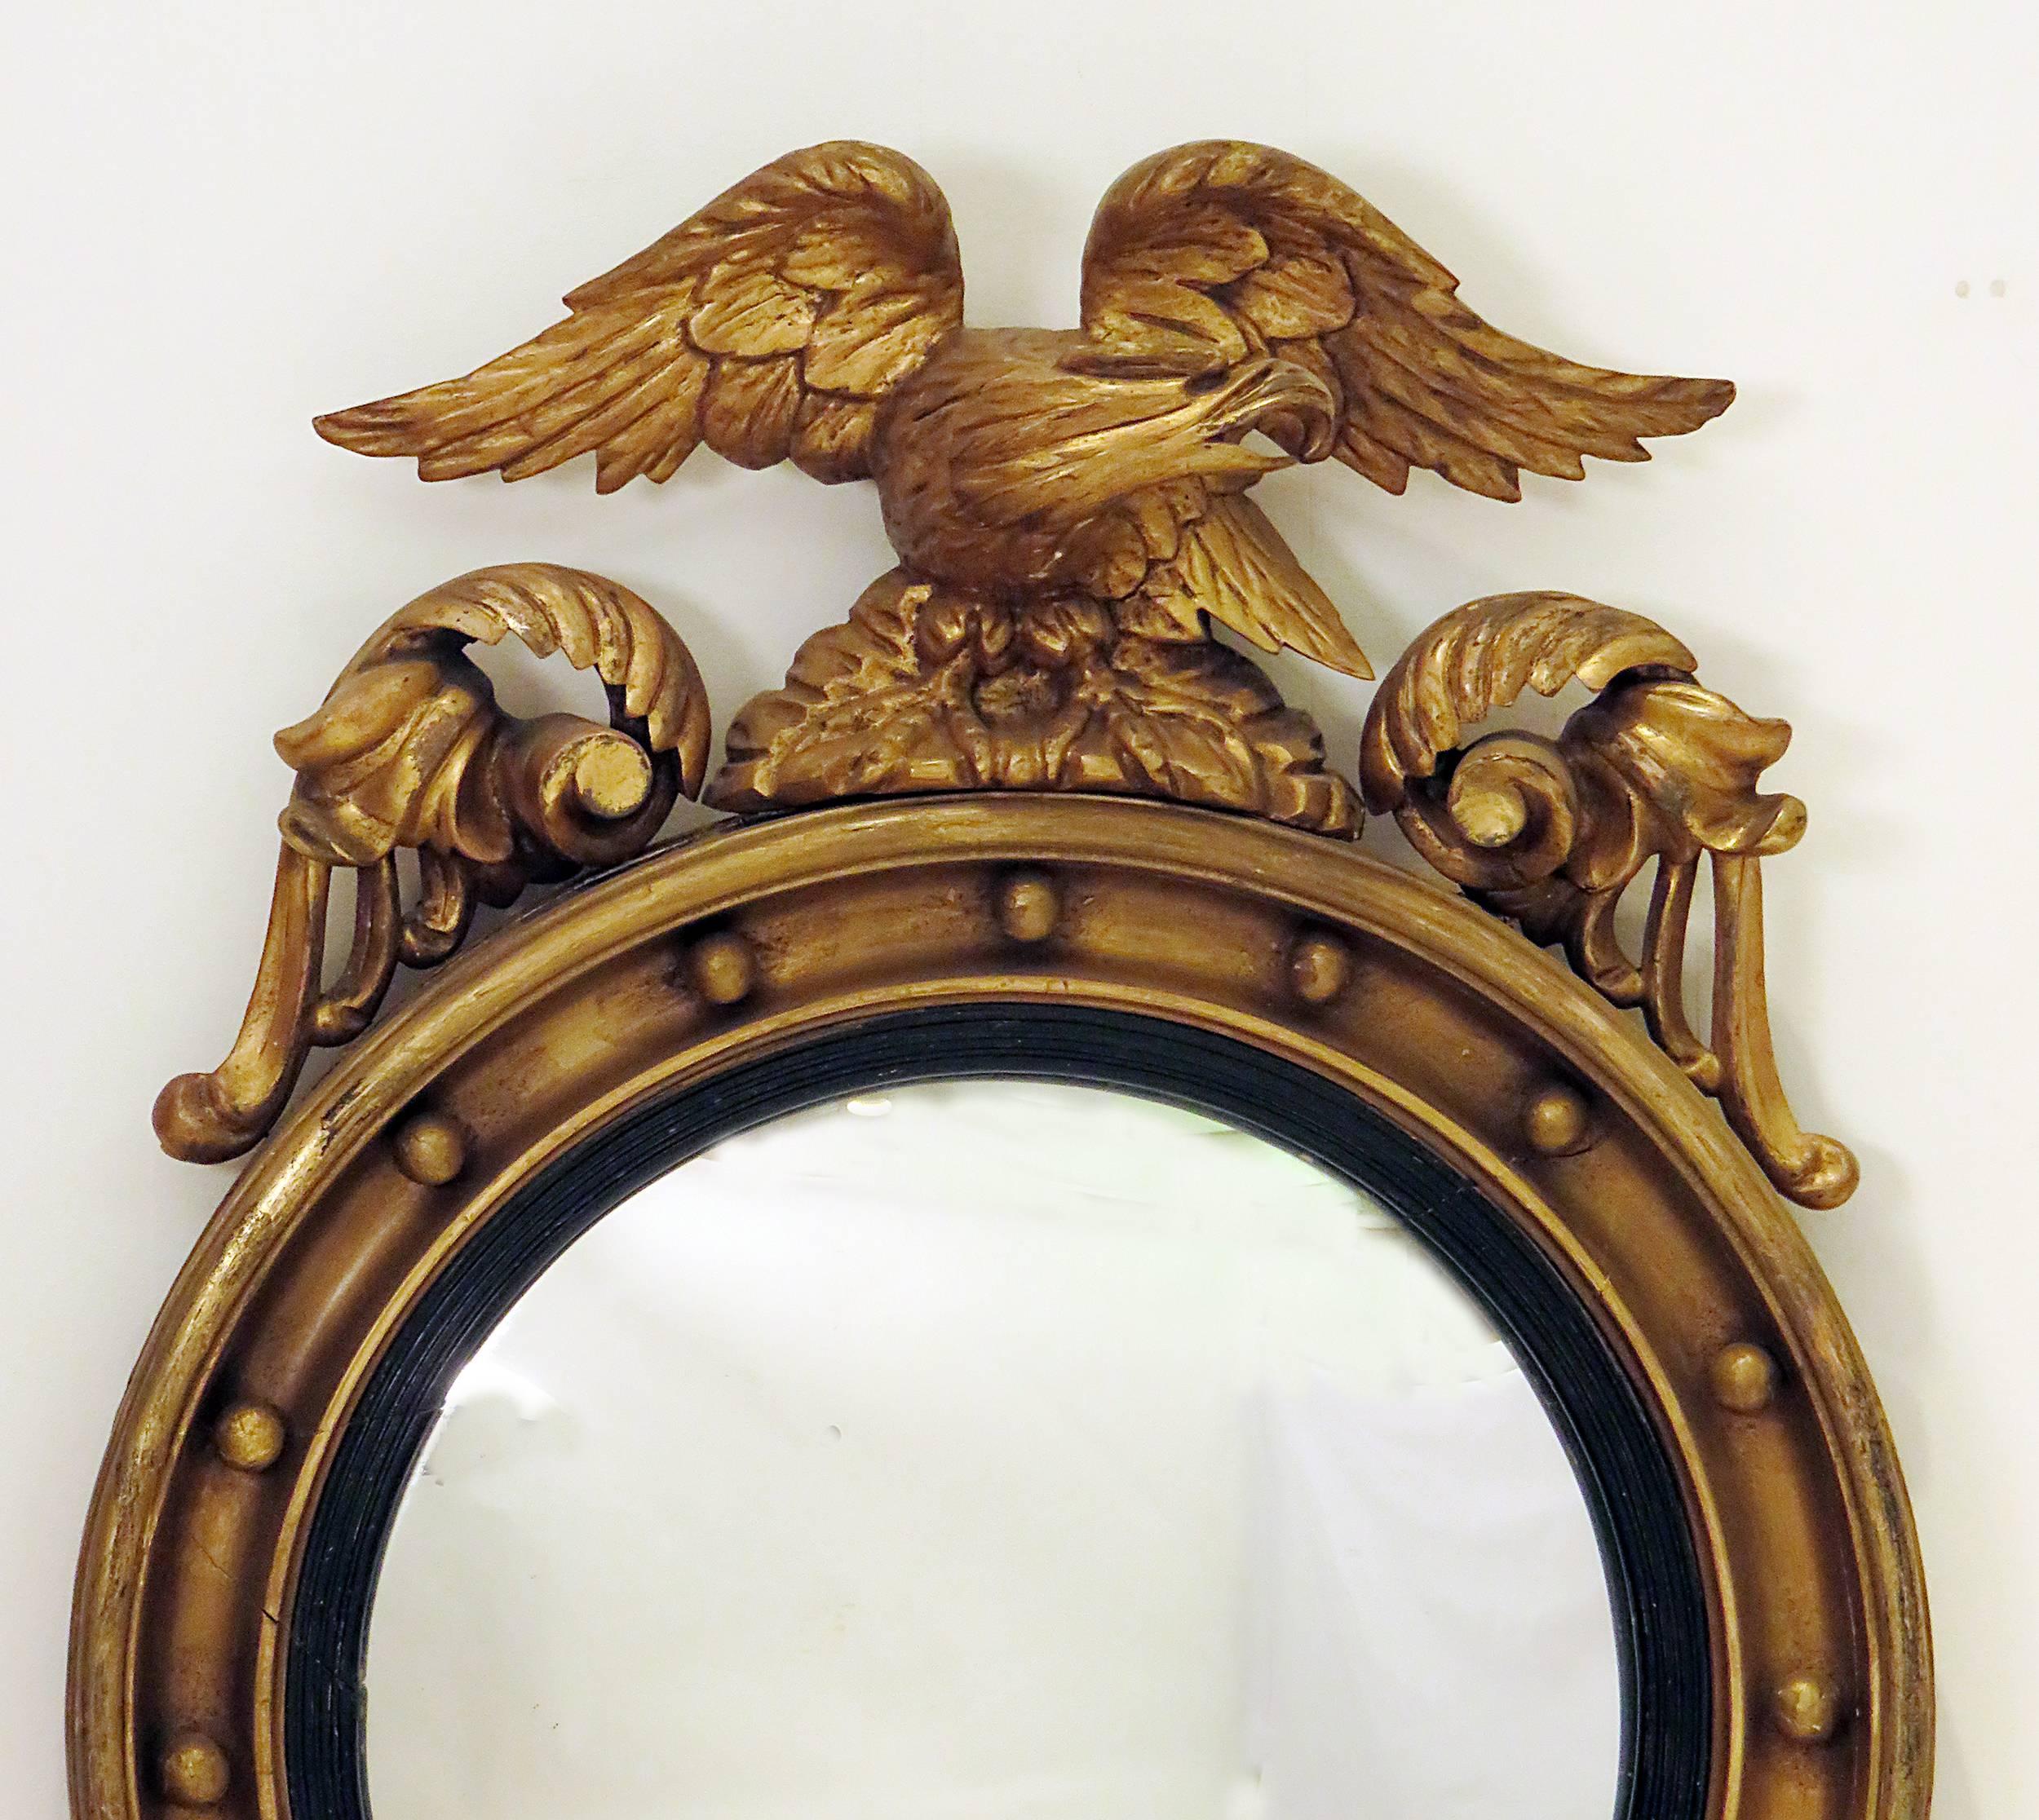 A nice convex giltwood mirror made in England during the 19th century. These mirrors are from the second half of the 19th century. The easiest way to spot a later mirror is that usually they have few applied gilded spheres. The earlier examples seem